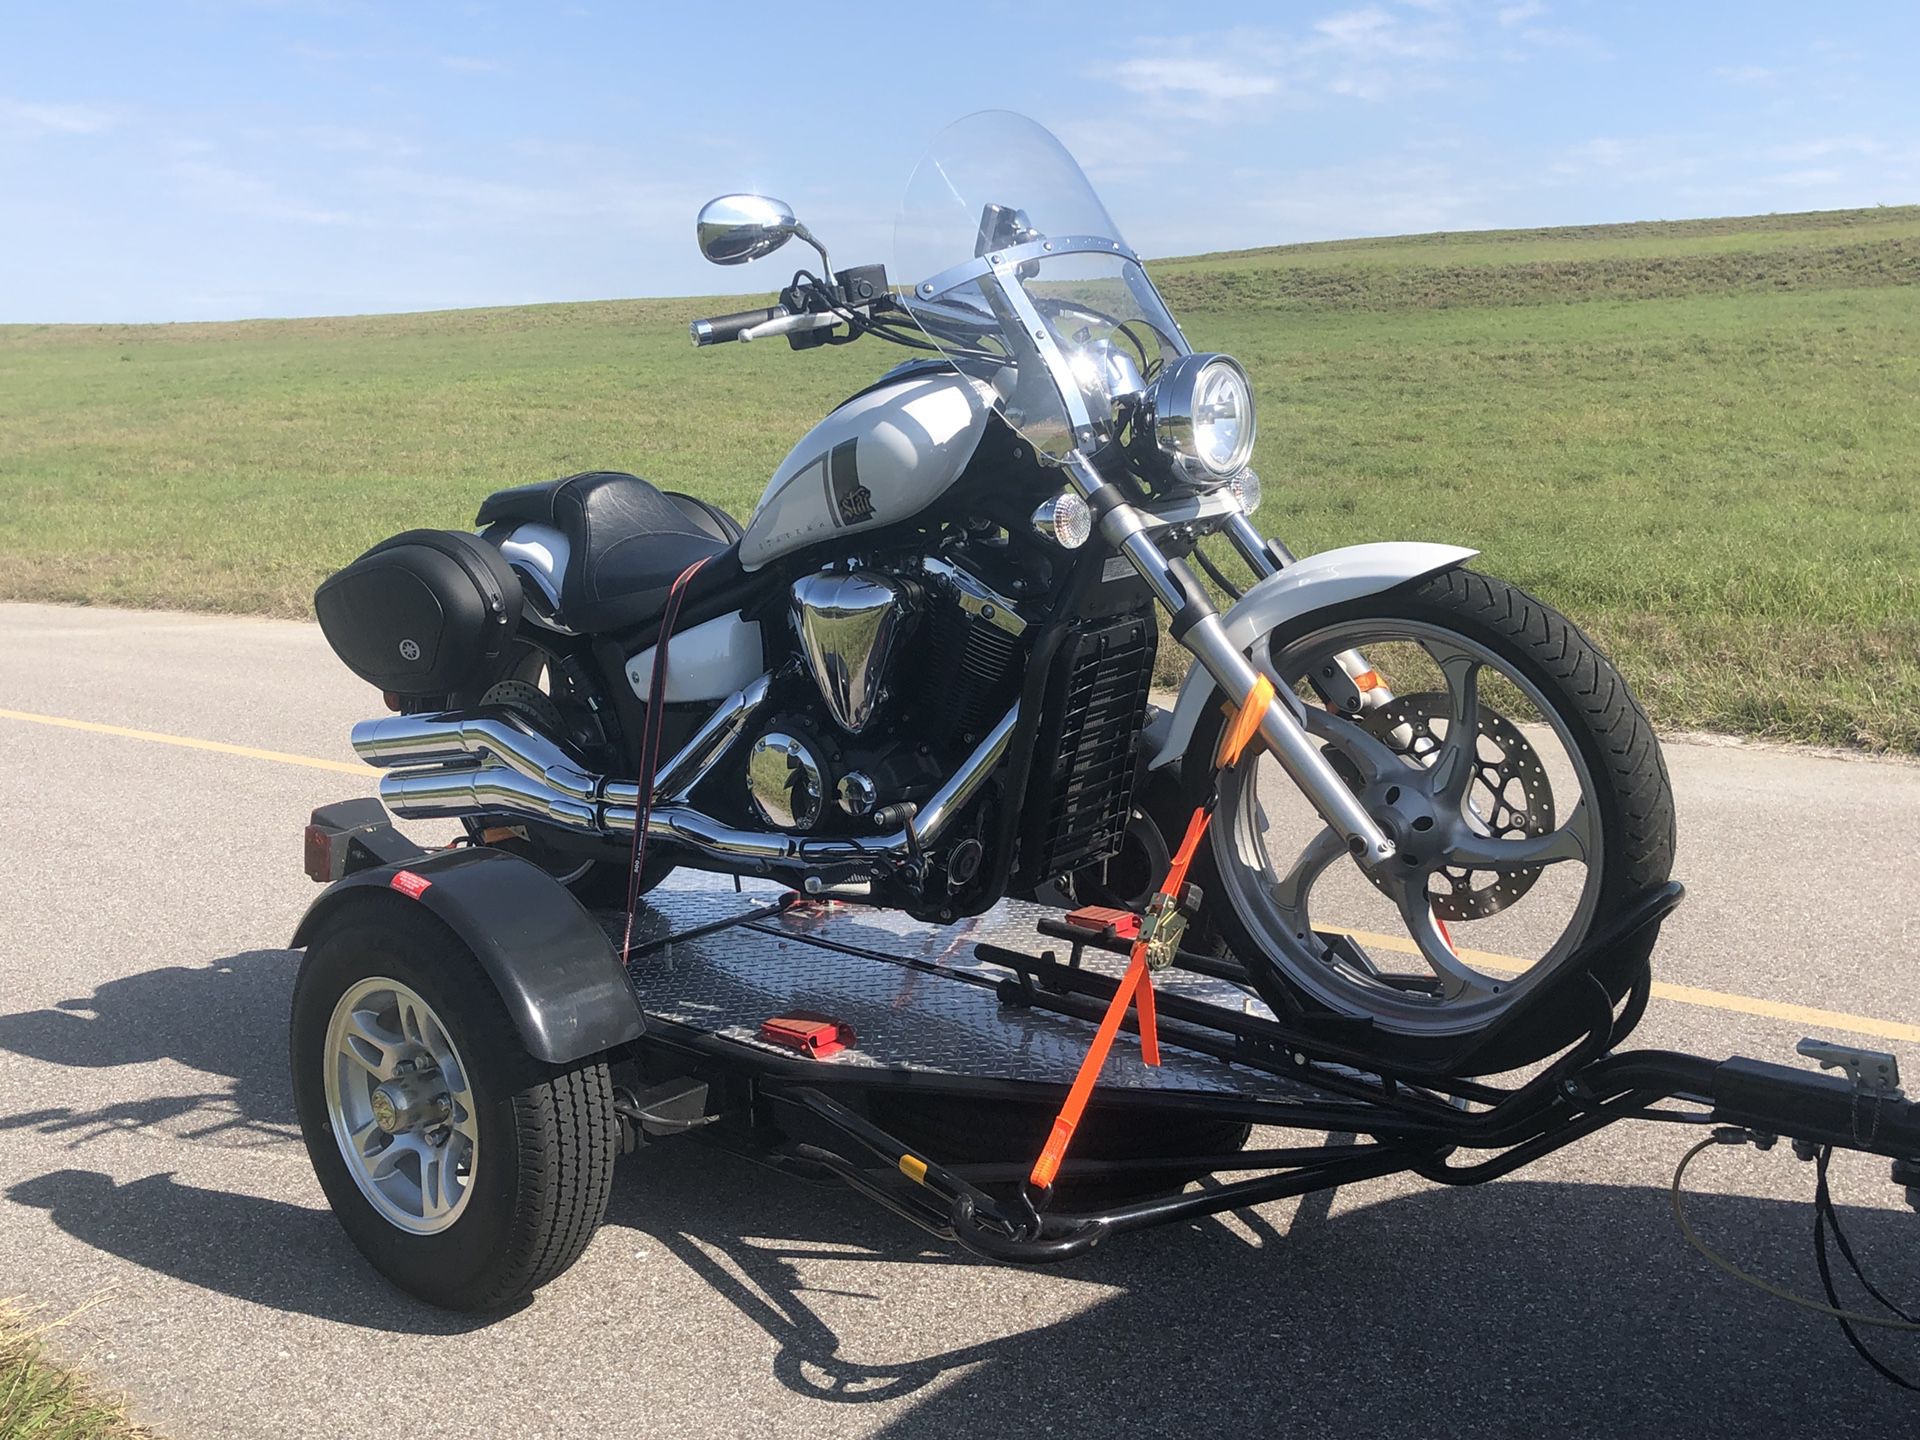 Yamaha Star Stryker 1300 only 1338 miles for only $4,900!